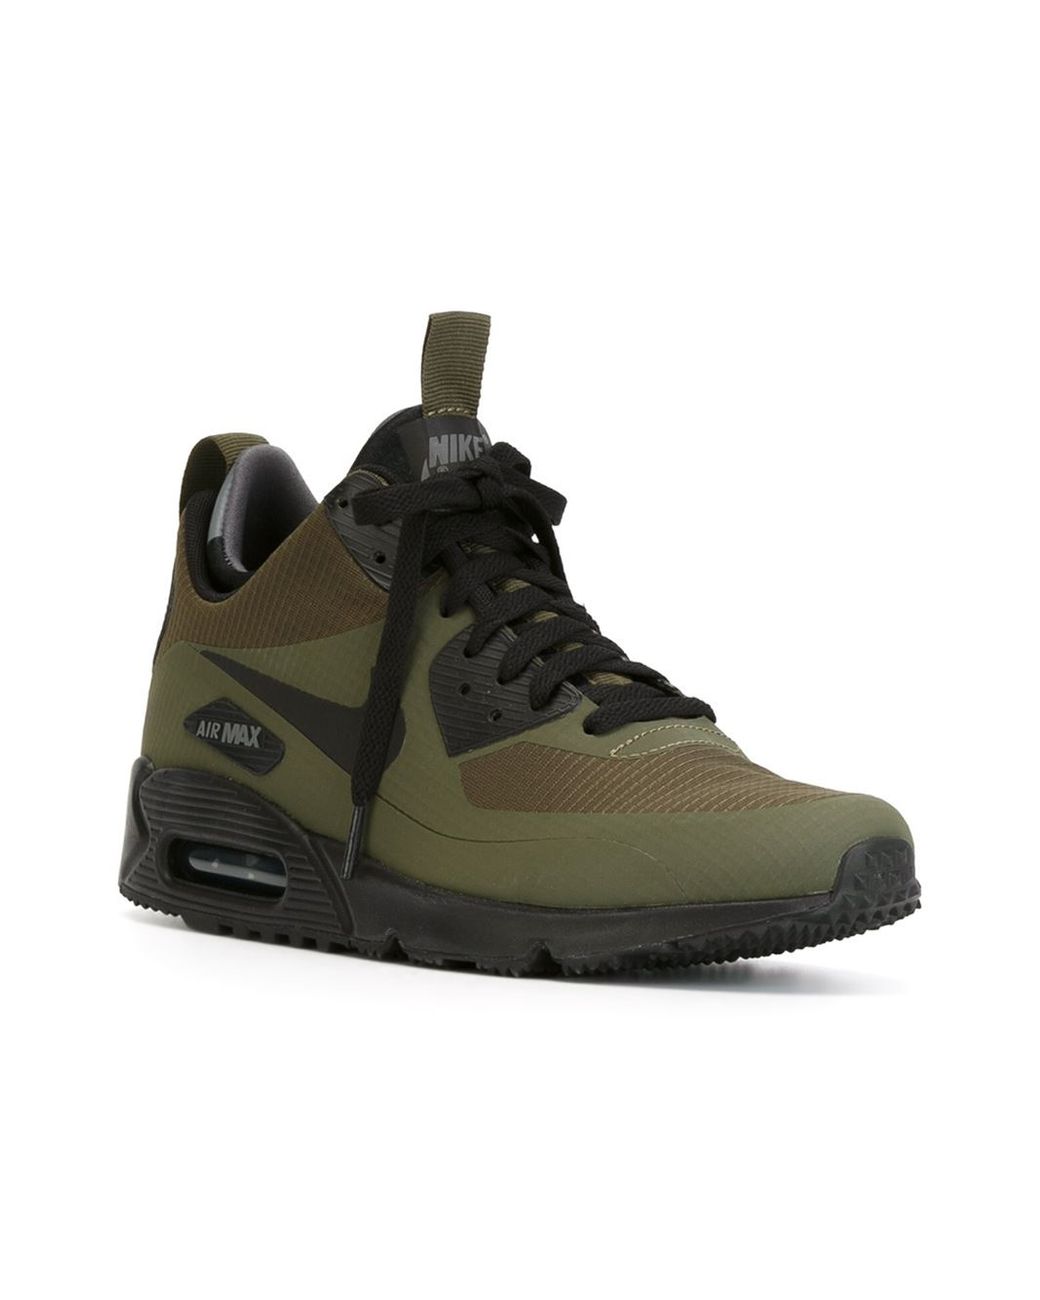 Nike Air Max 90 Mid Sneaker Boots Green for Men